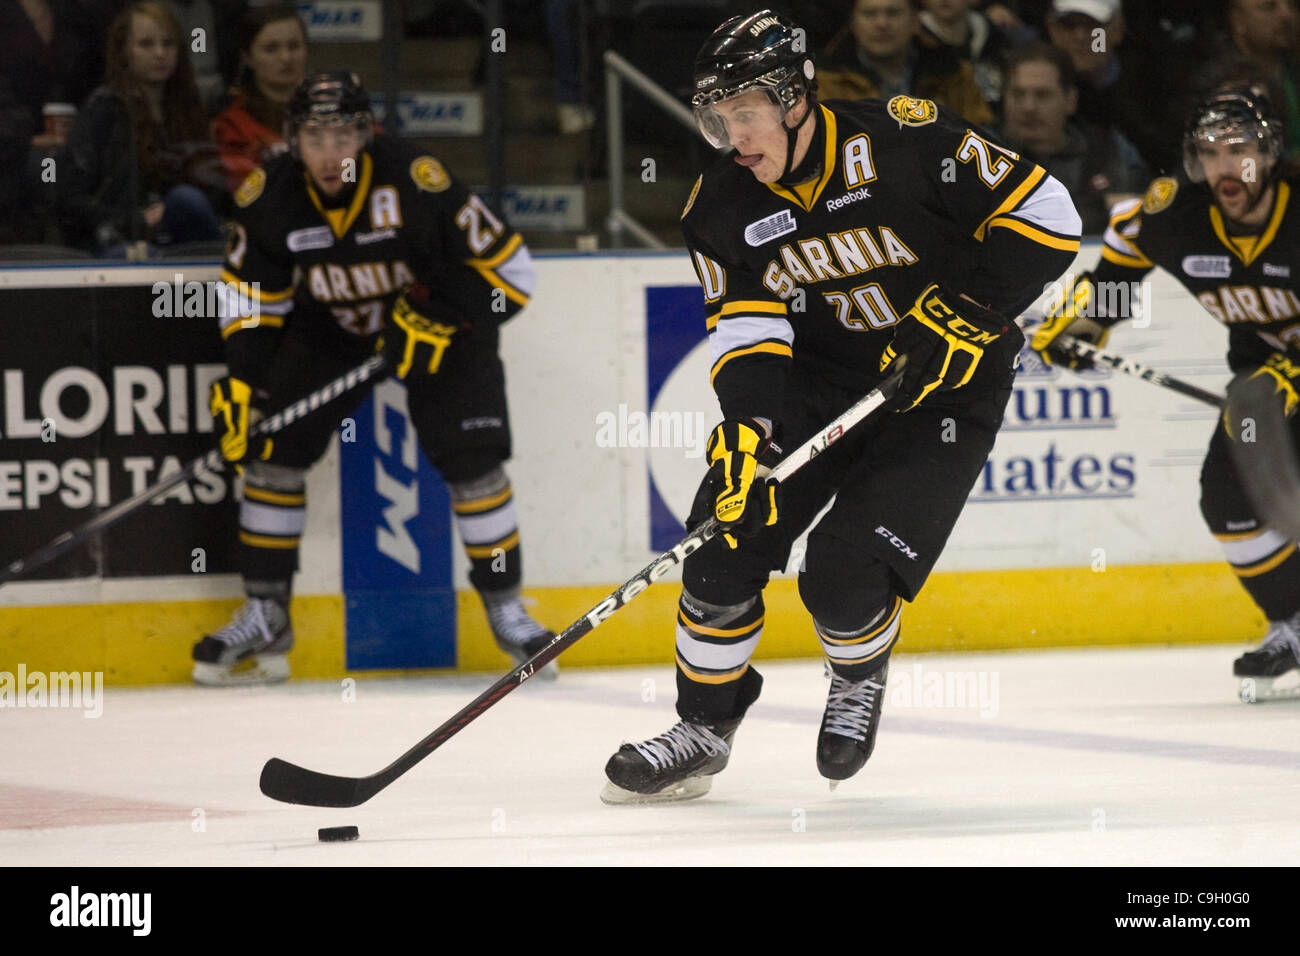 London Ontario, Canada - December 30, 2011. Brett Ritchie (20) of the Sarnia Sting carries the puck in an Ontario Hockey League game between the London Knights and the Sarnia Sting. London won the game 7-3. Stock Photo